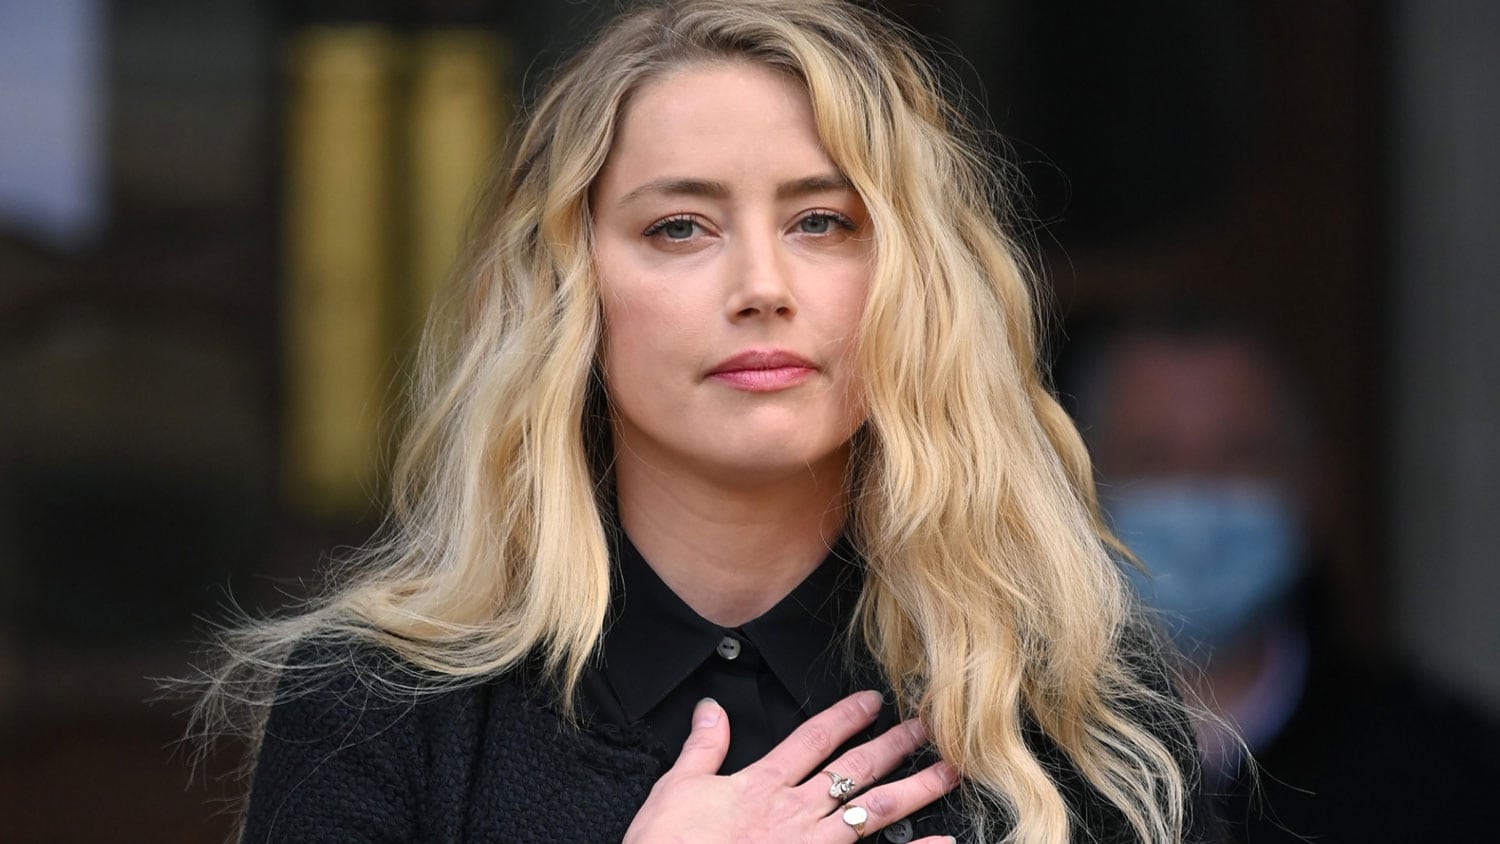 Amber Heard Reportedly Offered $10M To Star In An Adult Movie